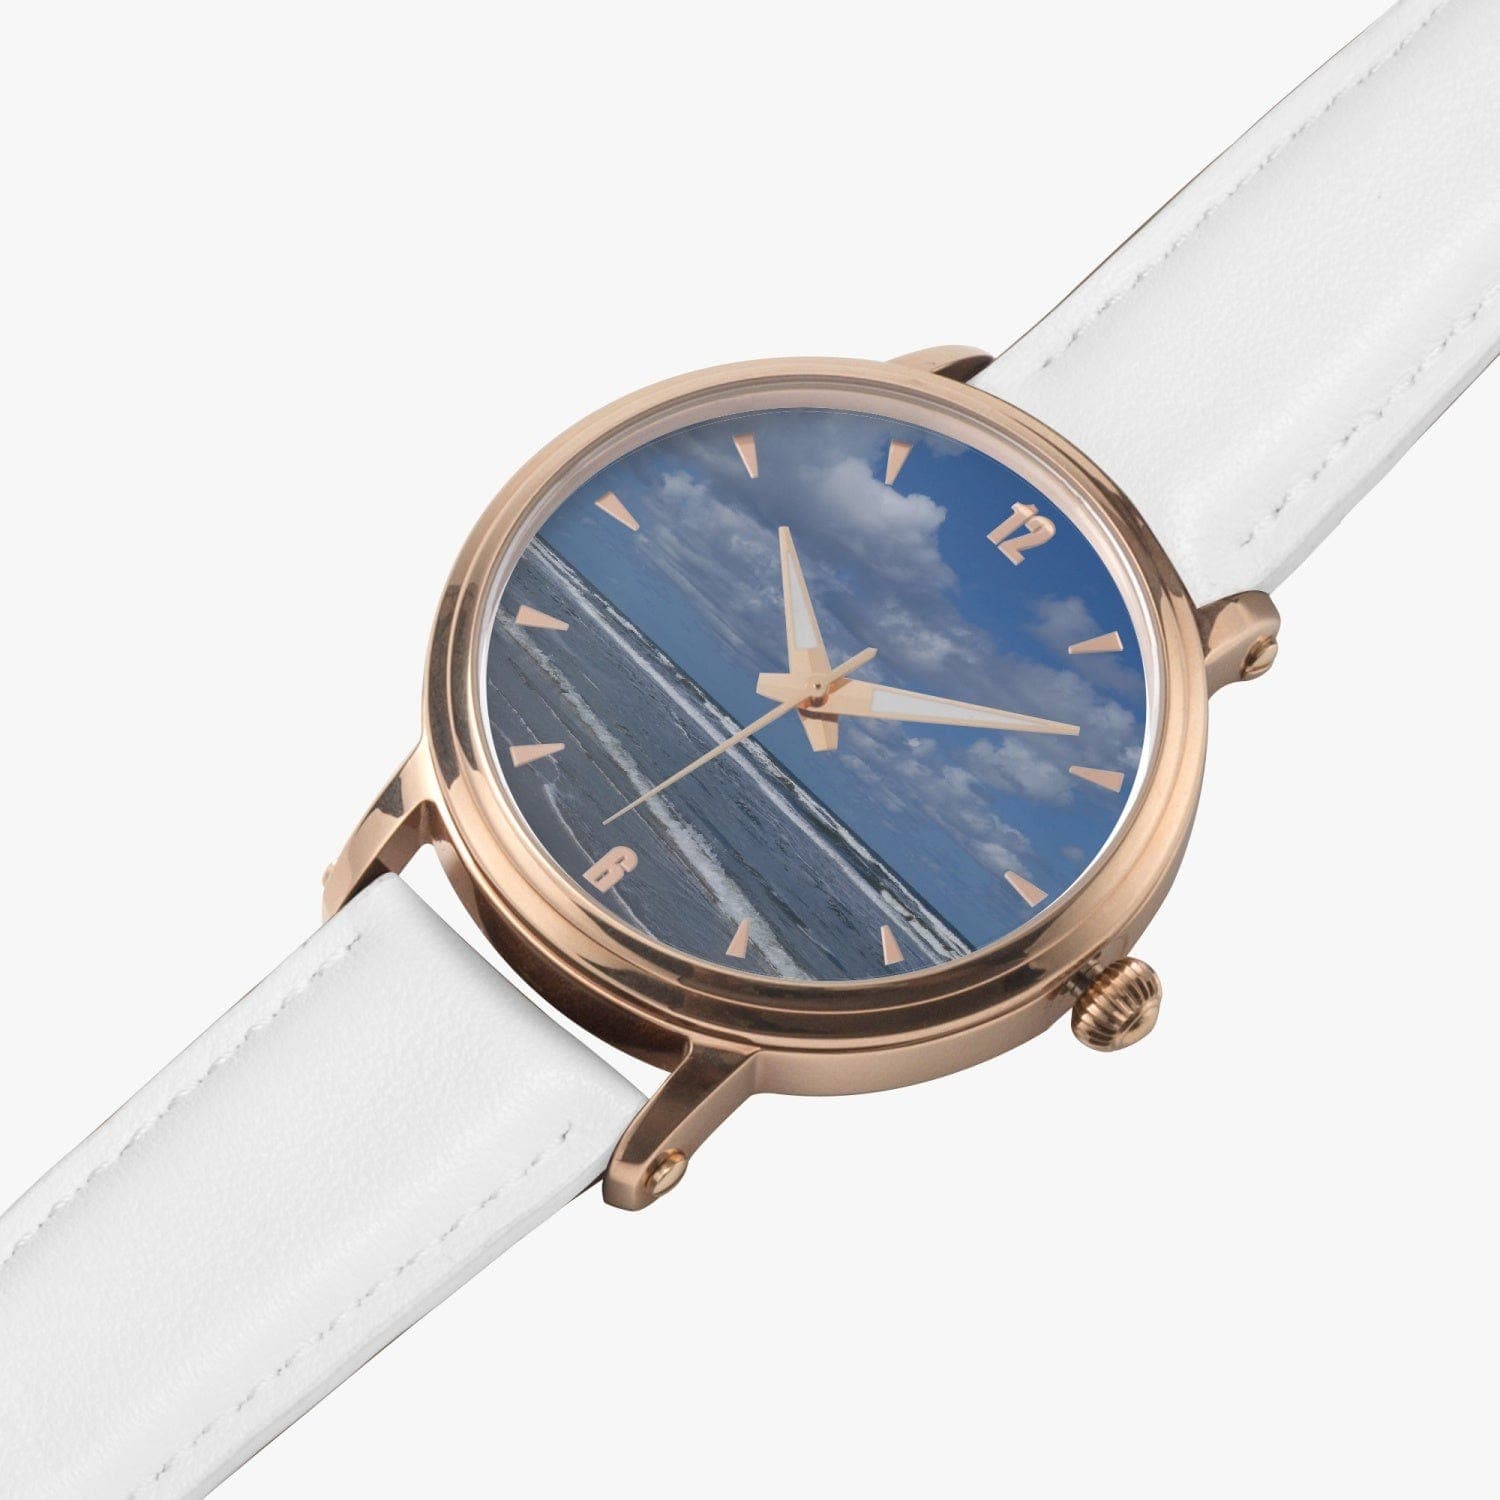 Summer time. 46mm Unisex Automatic Watch (Rose Gold),  Designer watch by Sensus Studio